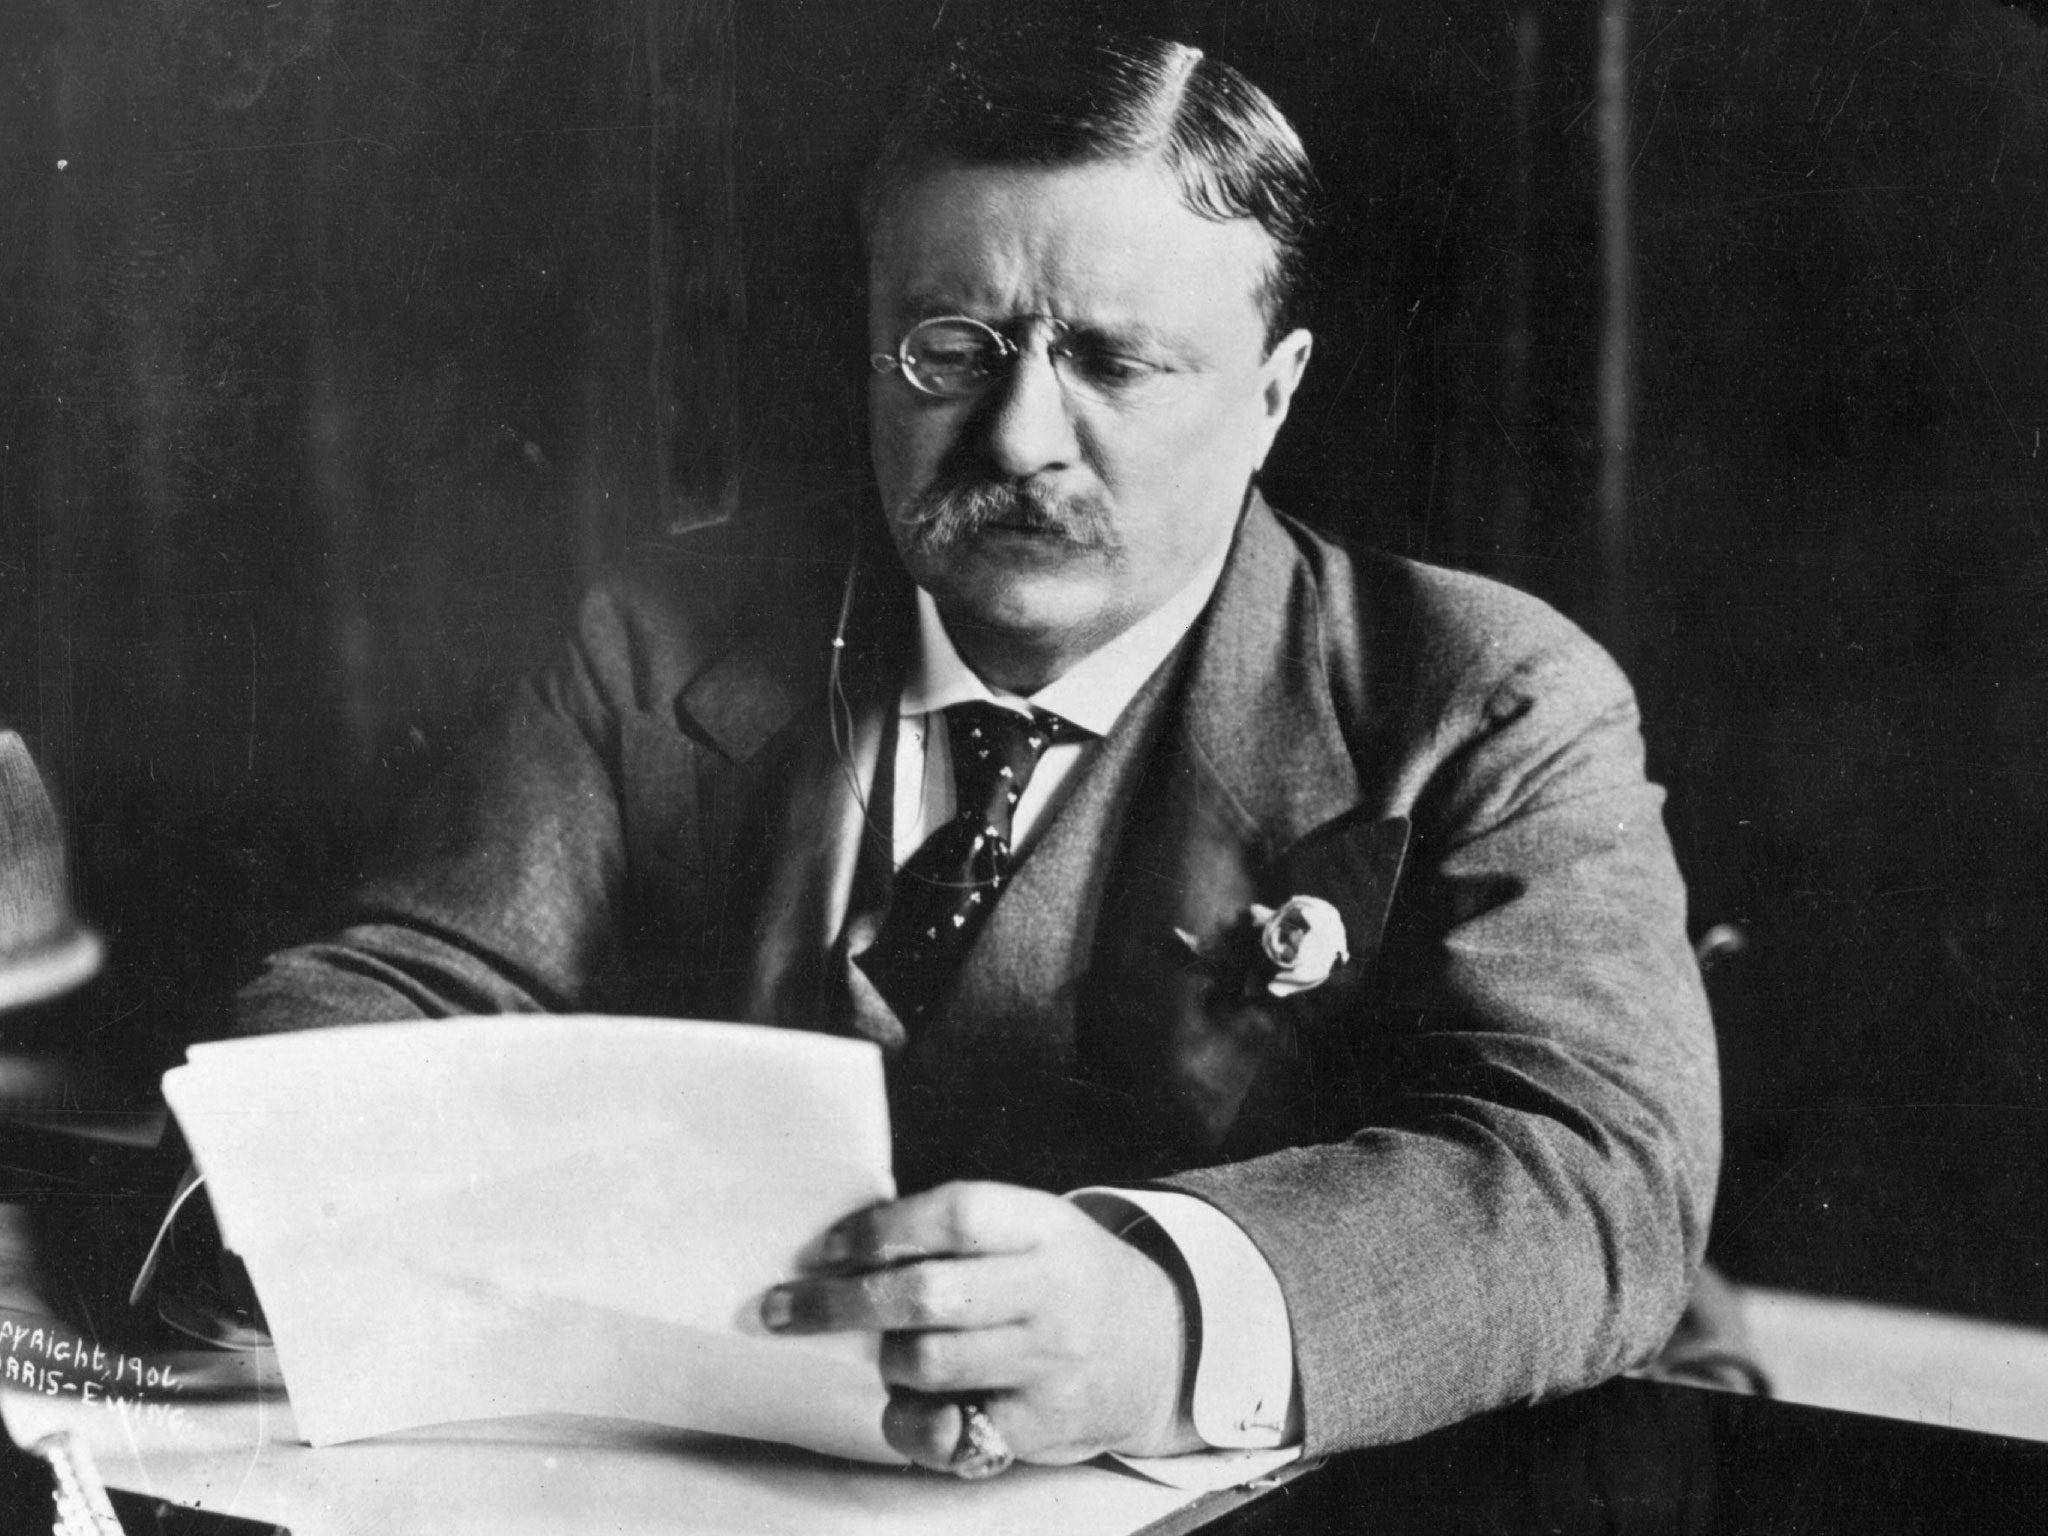 Theodore Roosevelt, who was the 26th President of the United States